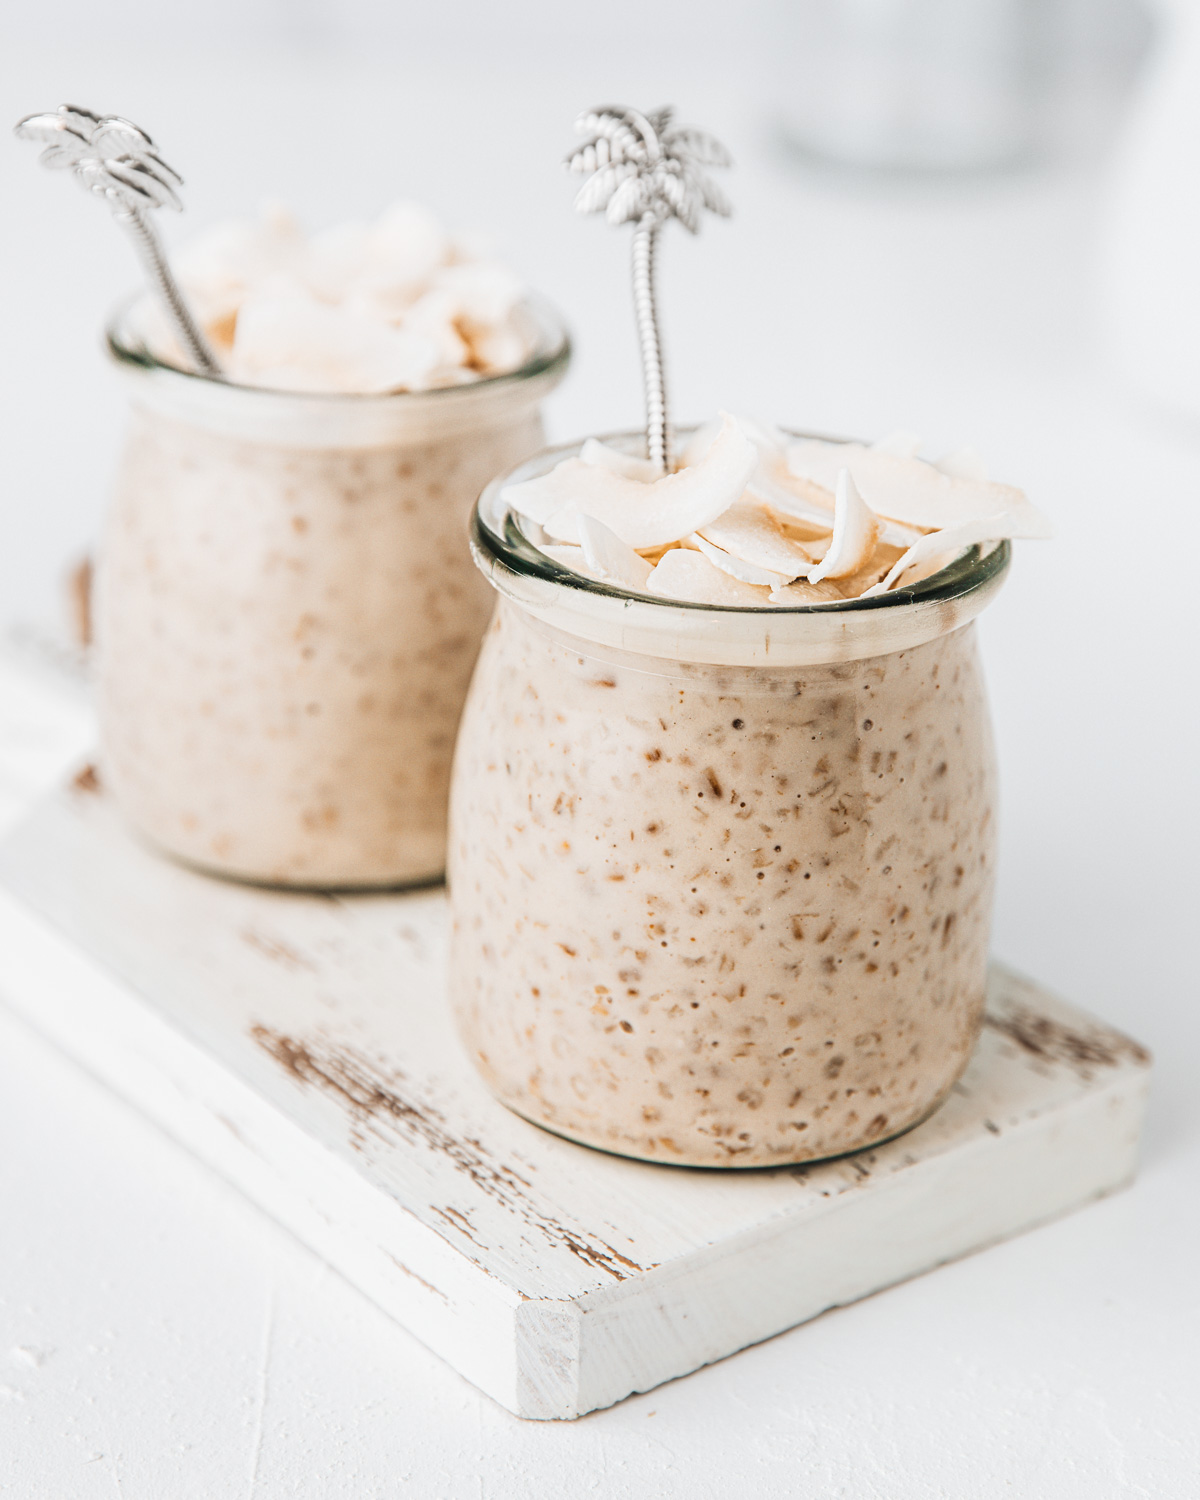 Overnight Steel Cut Oats with Coconut